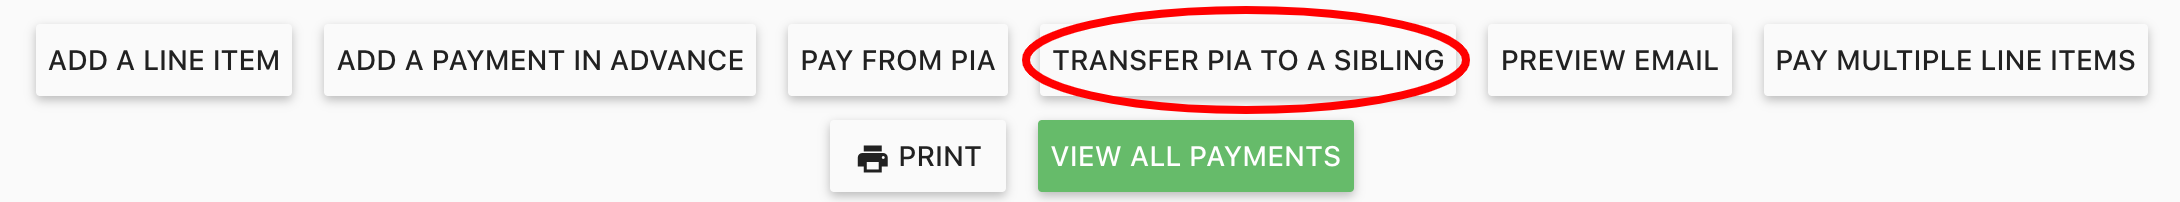 Transfer_PIA.png